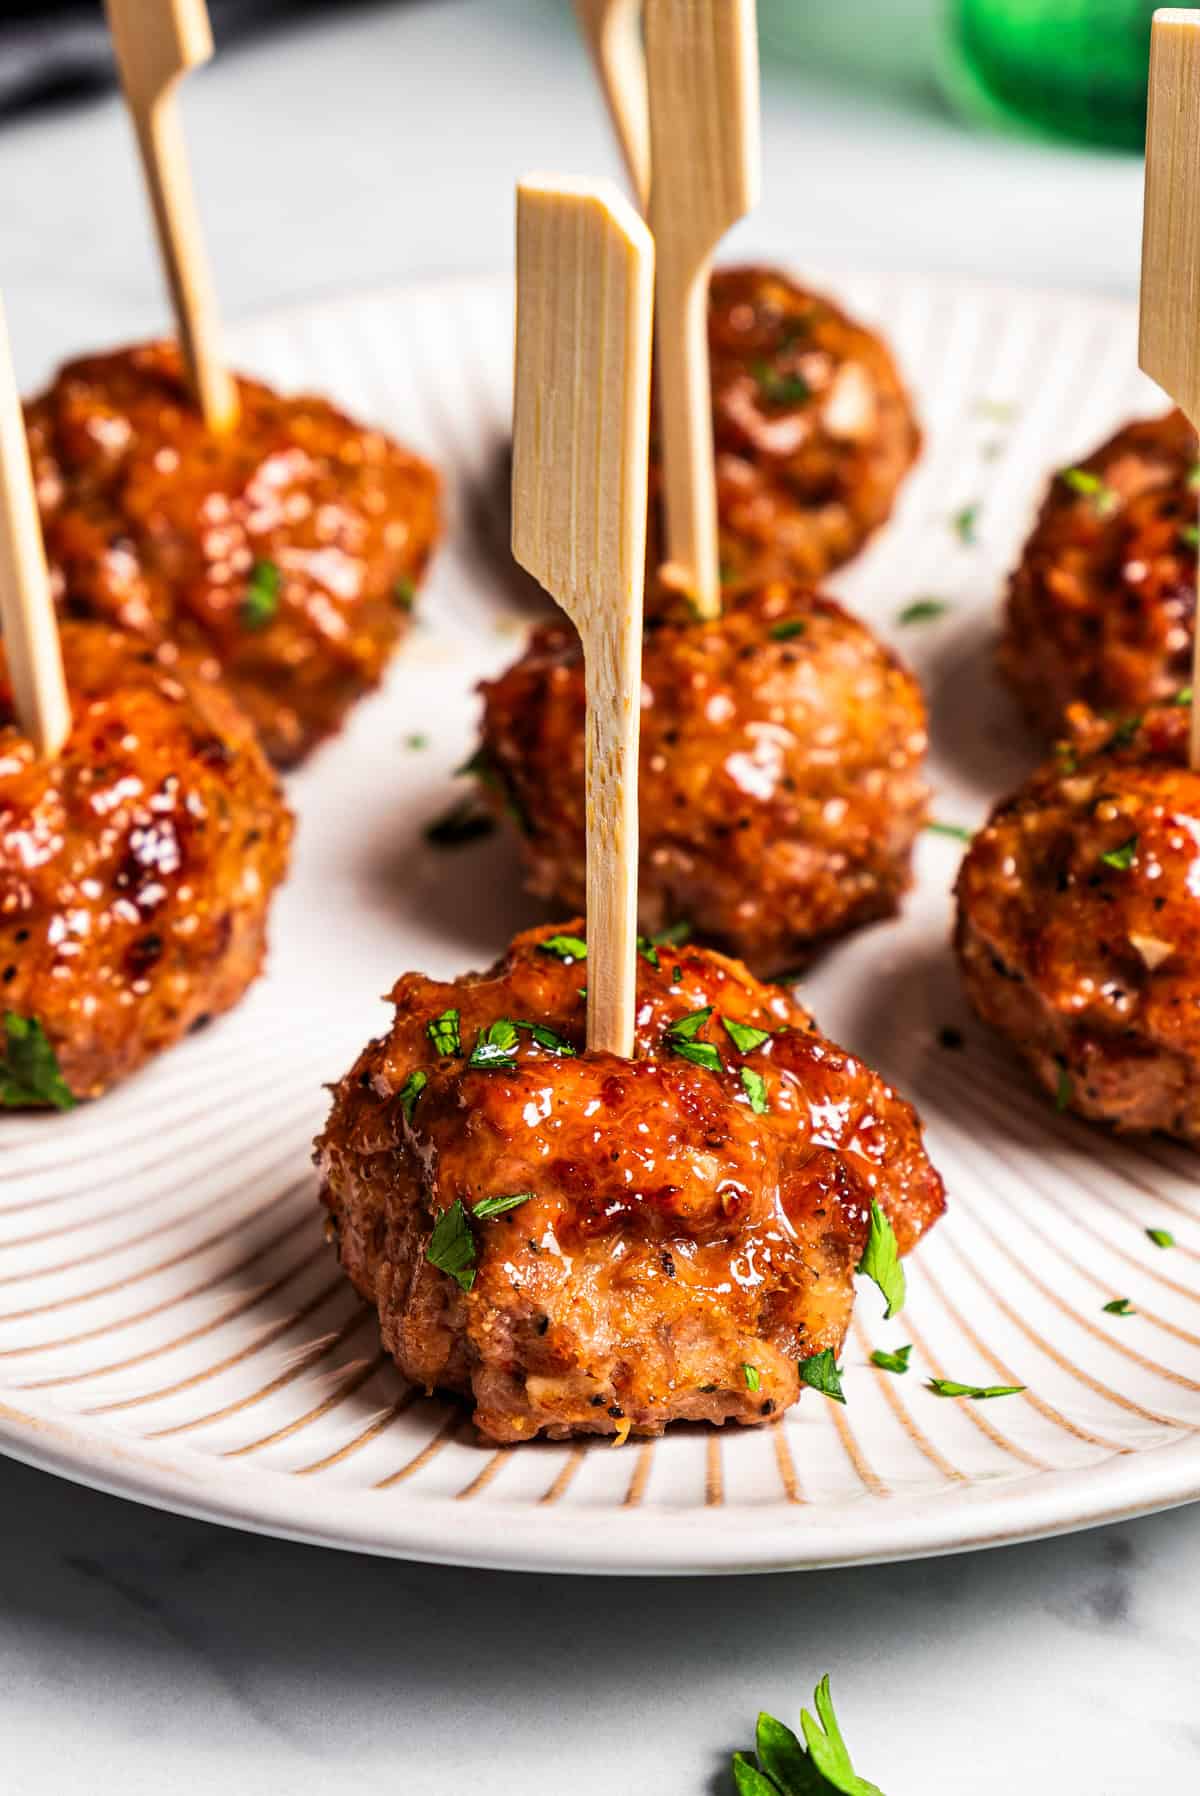 Turkey meatballs skewered with cocktail toothpicks on a white plate.